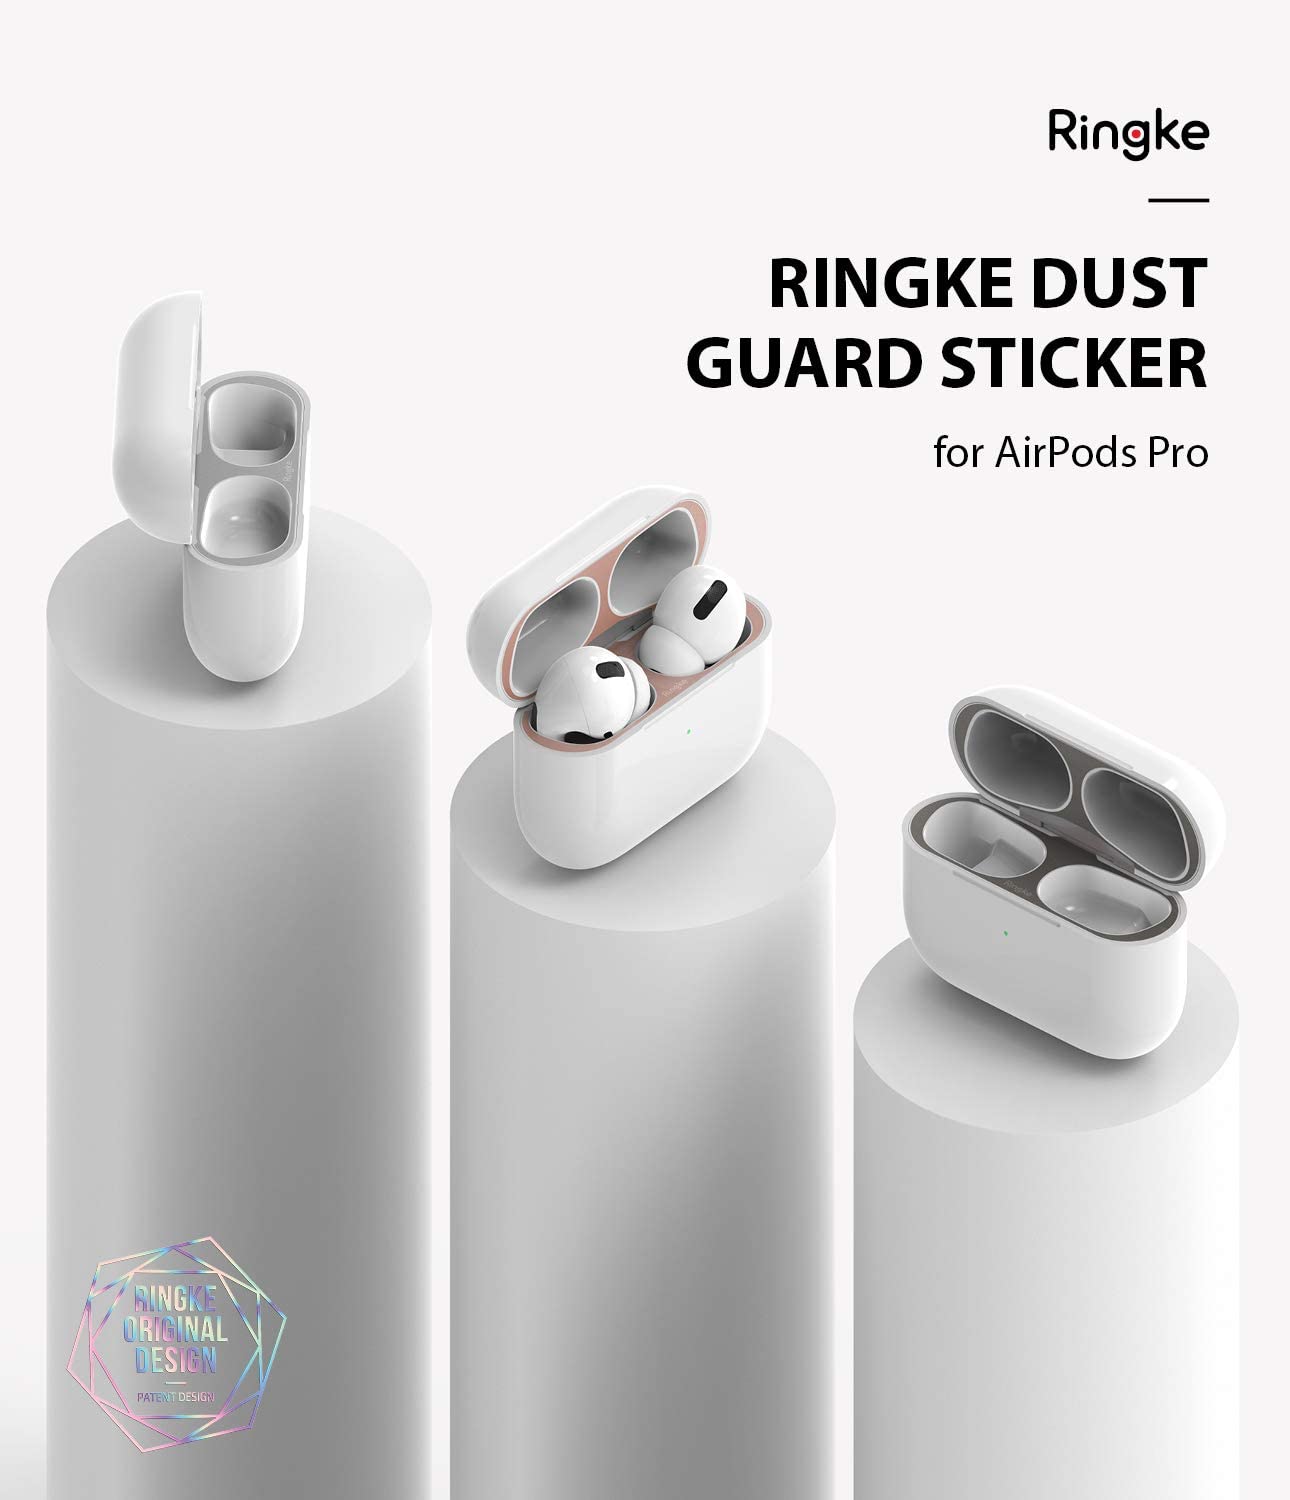 Ringke Dust Guard Sticker for Airpods Pro(2pack), Rose Gold Dust Guard Sticker Ringke 